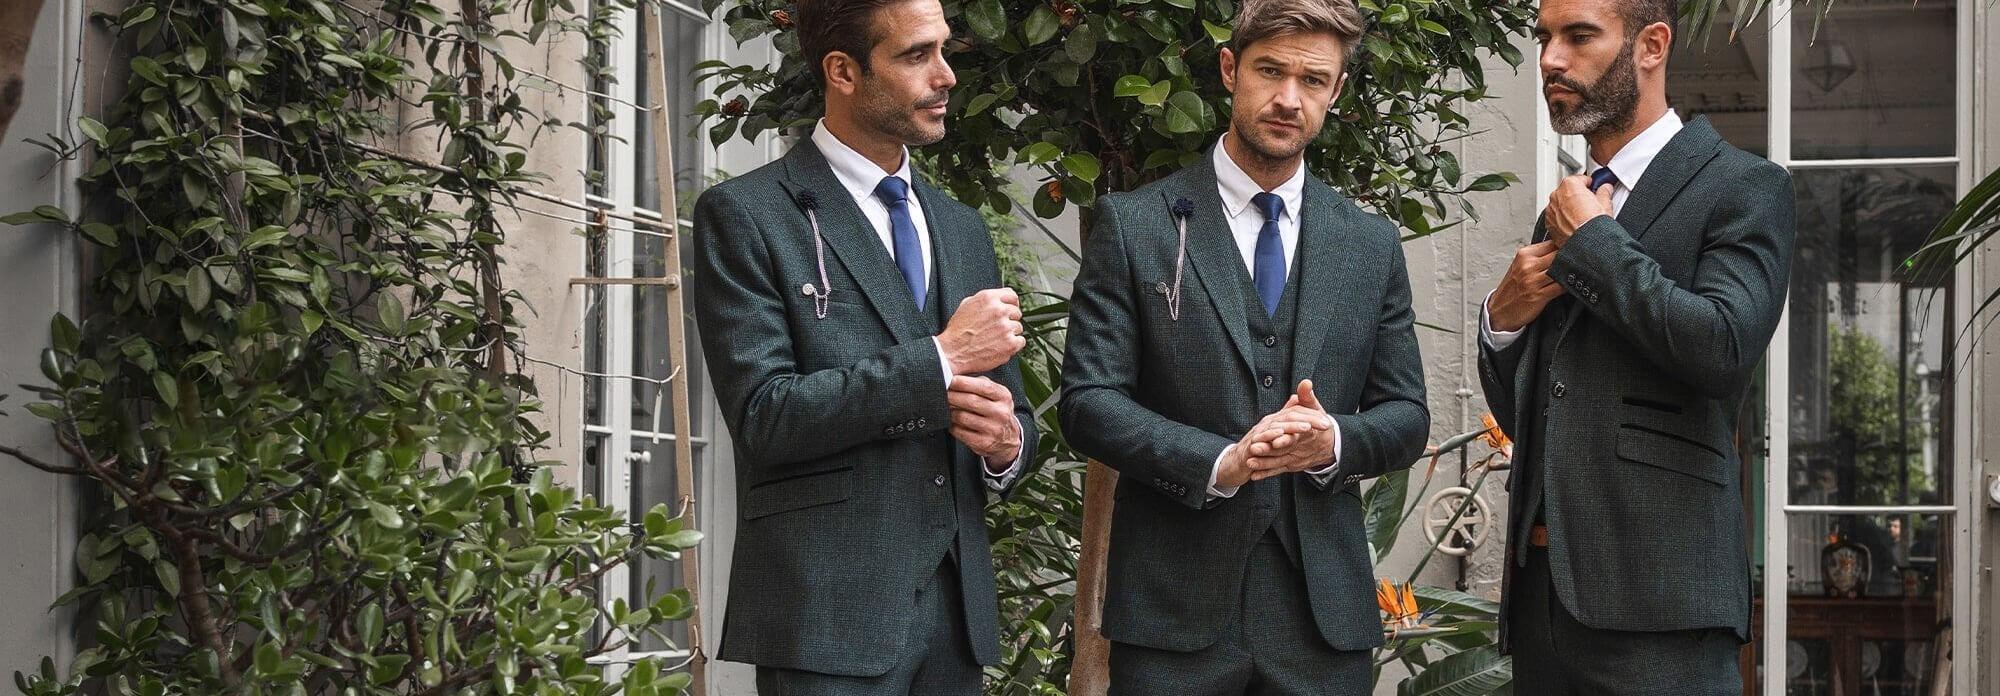 MODERN SUITS TO BUY FROM JUST £160